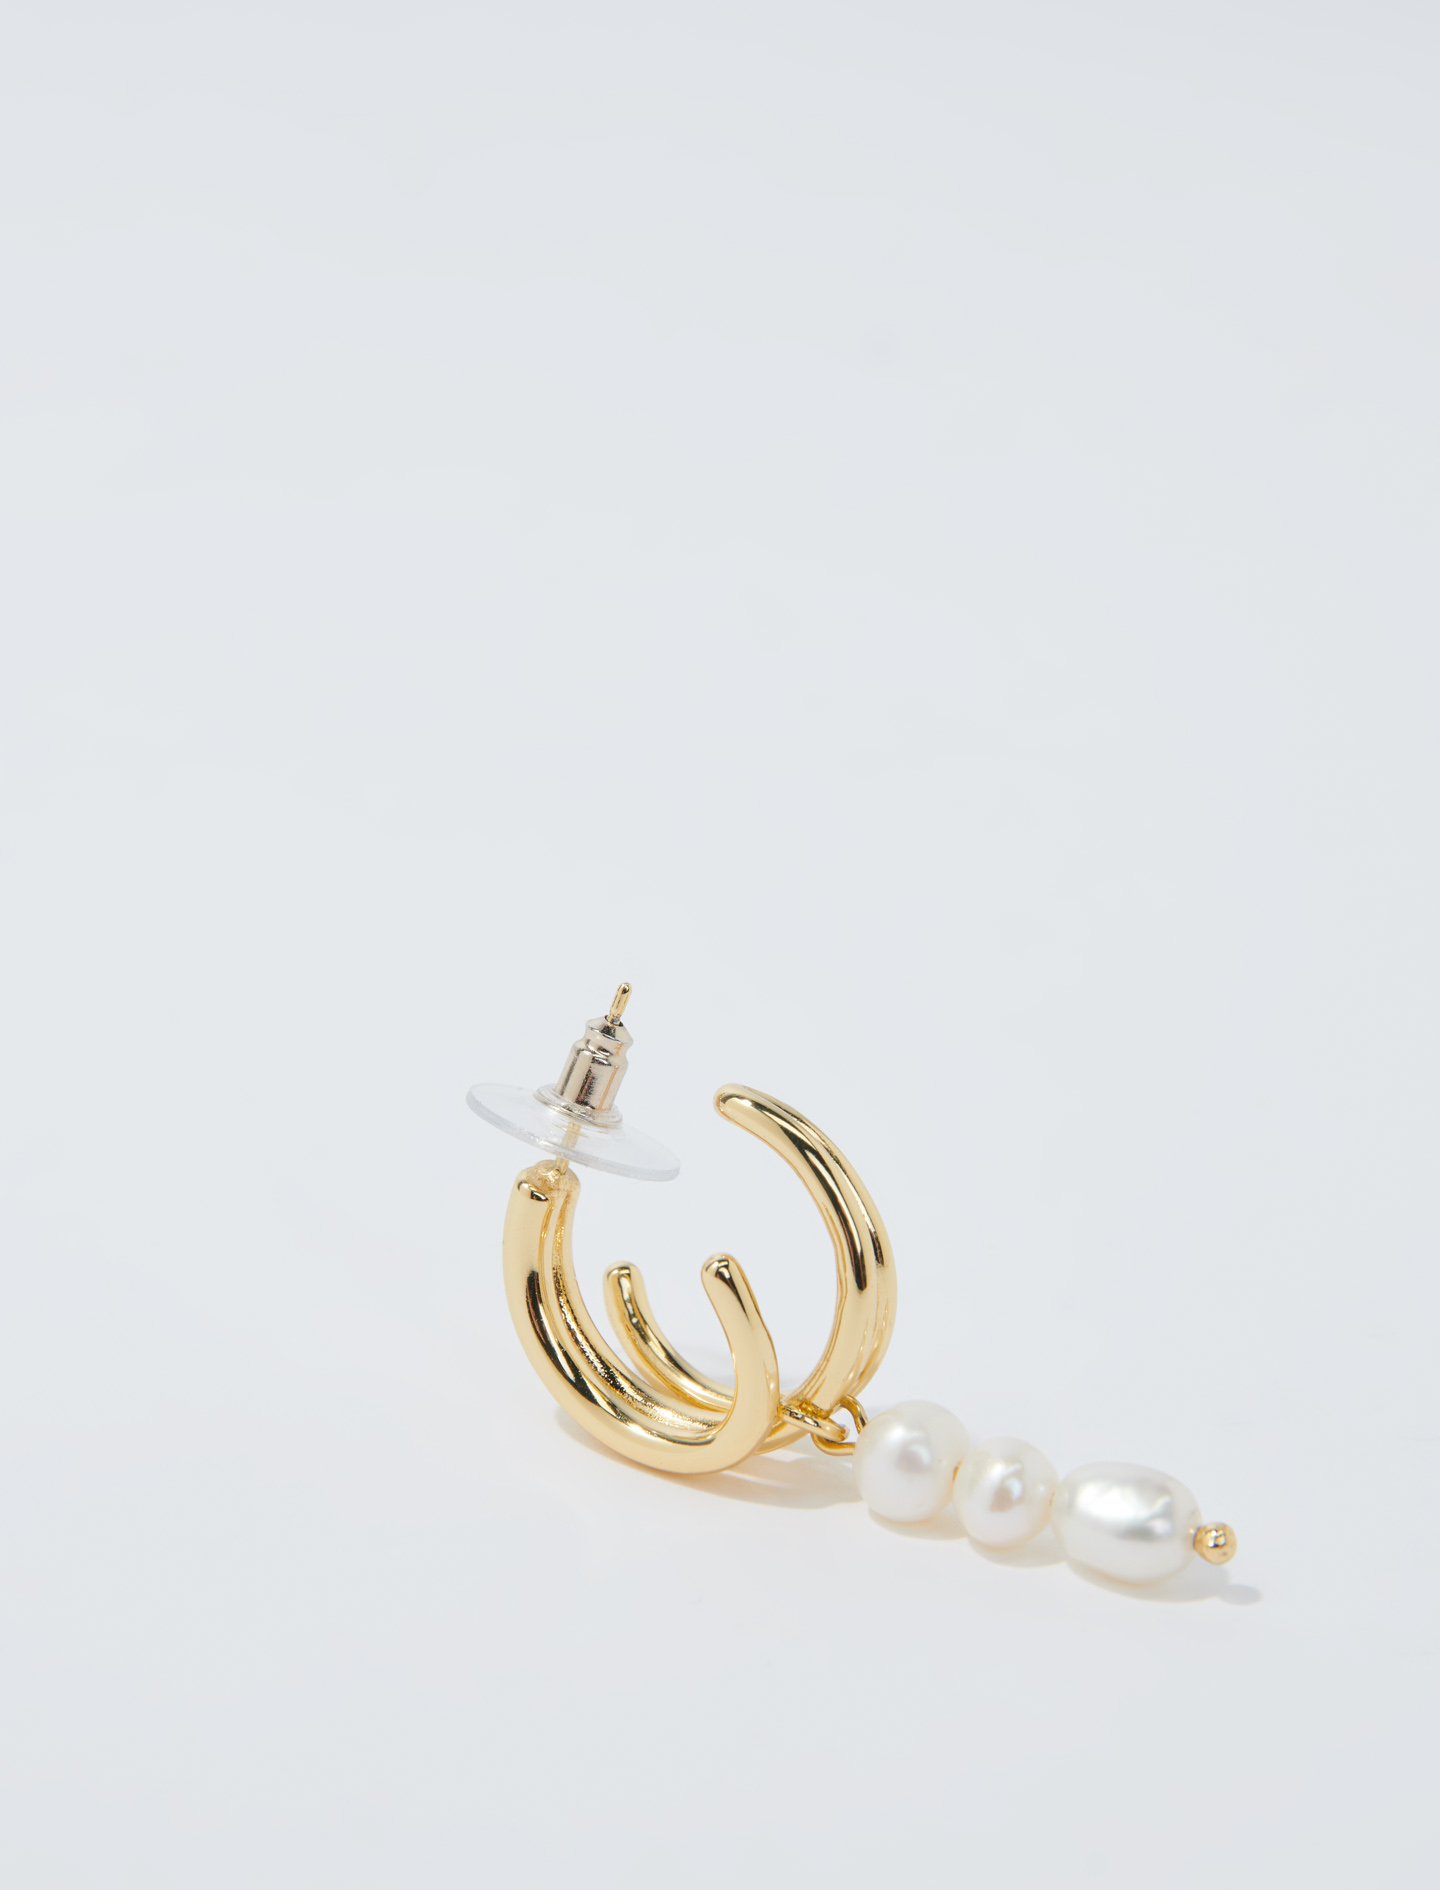 Earrings decorated with pearls - Gold